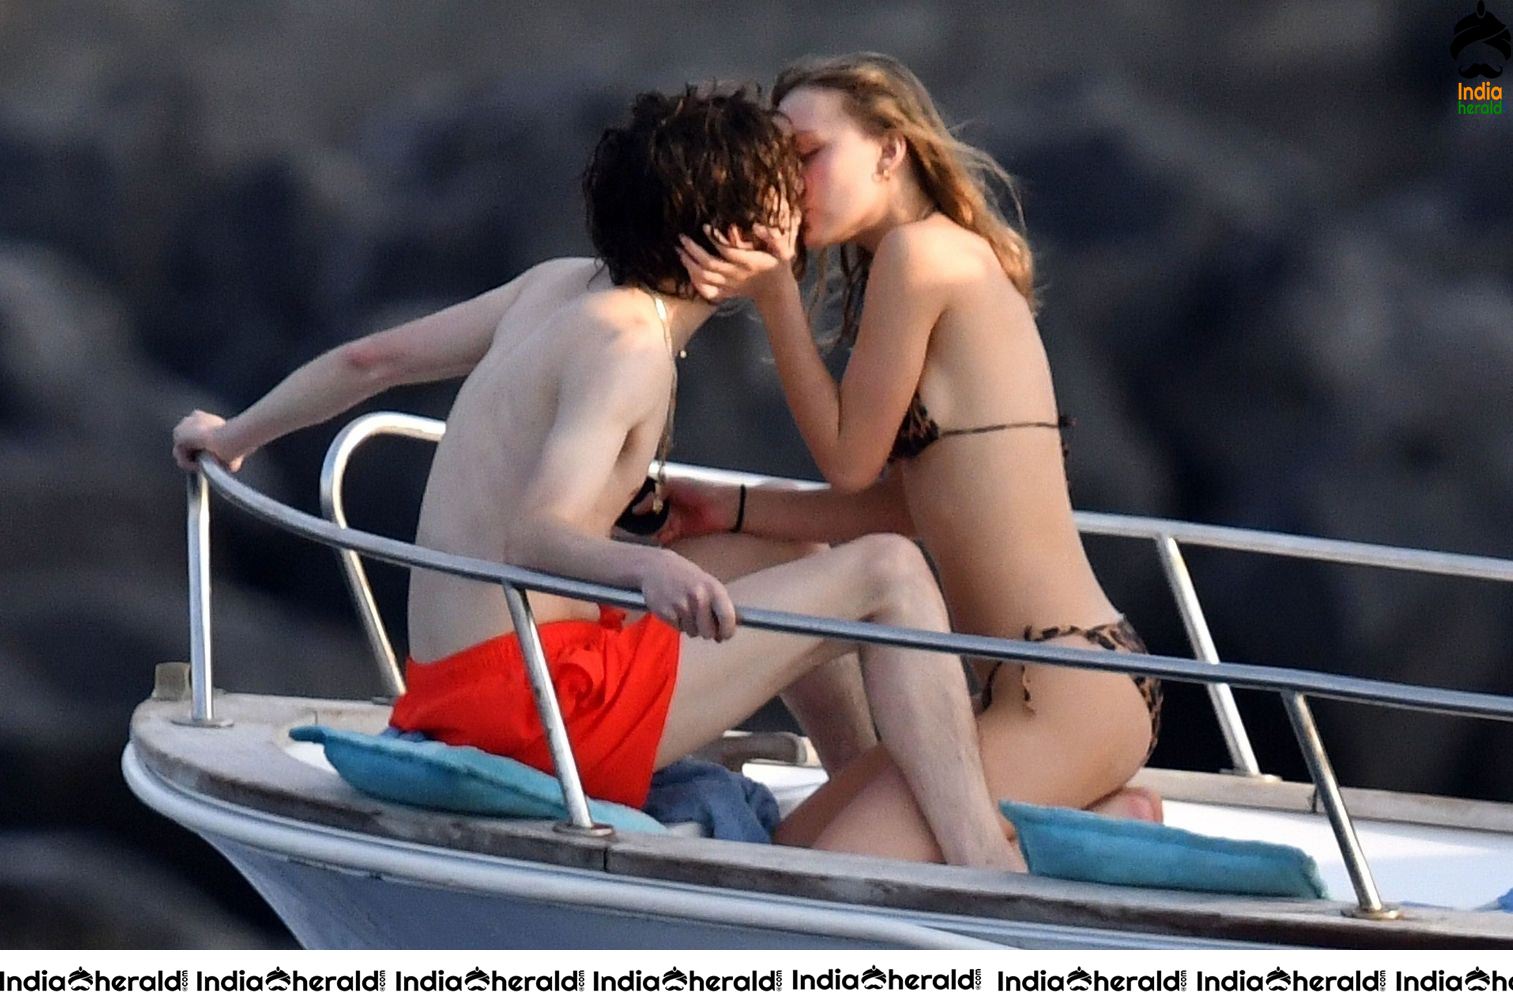 Johnny Depp Daughter Lily Rose Depp Caught in Bikini With her Boyfriend in a Boat Set 1